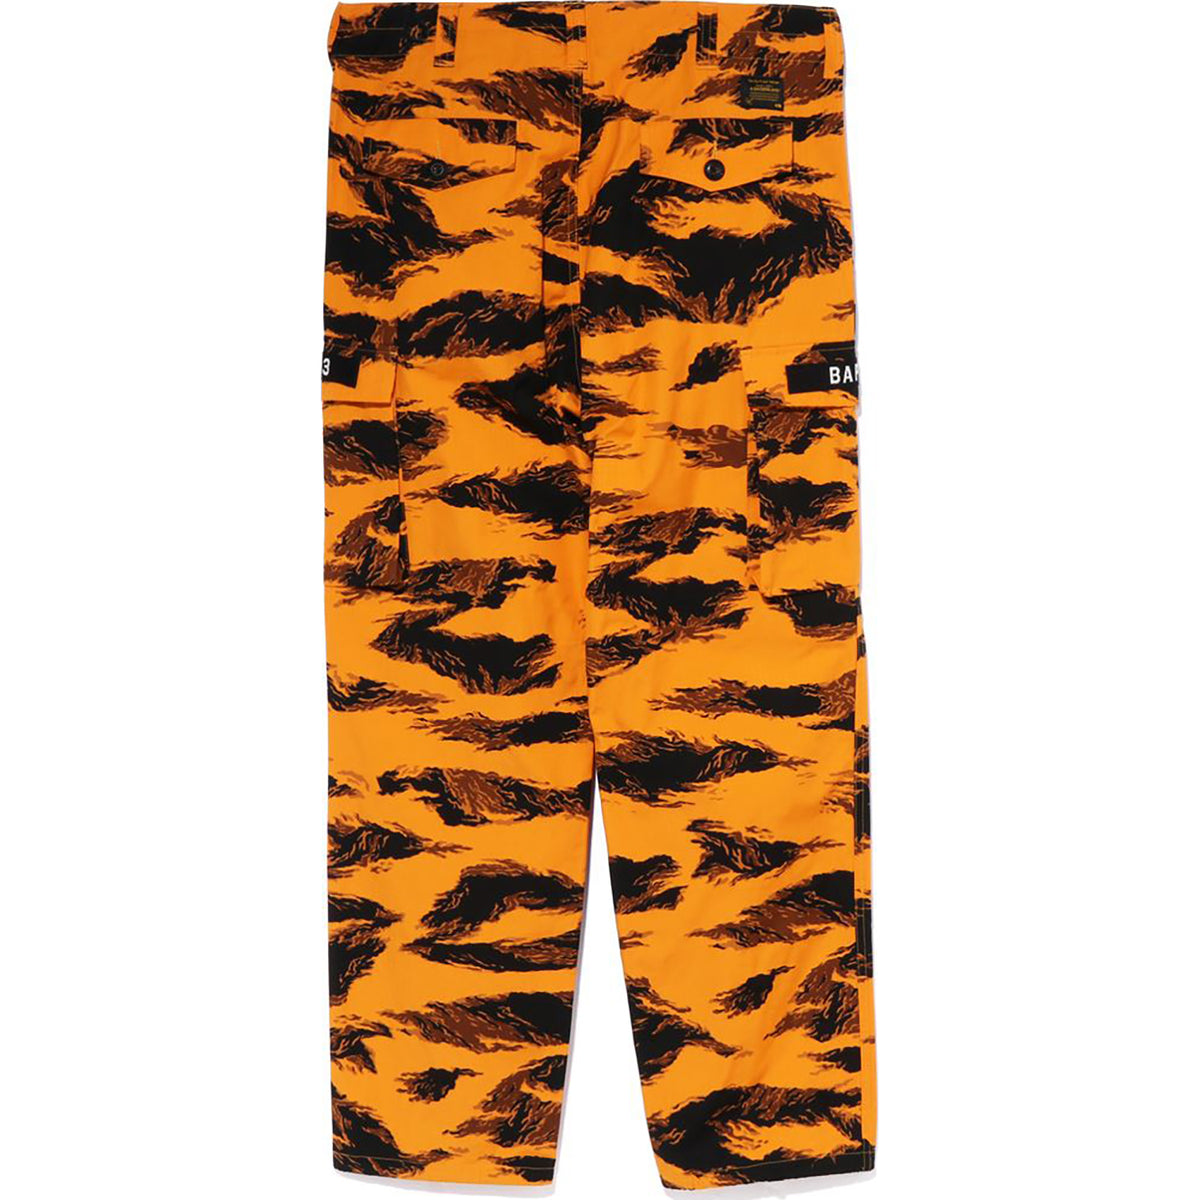 TIGER CAMO RELAXED FIT MILITARY PANTS MENS